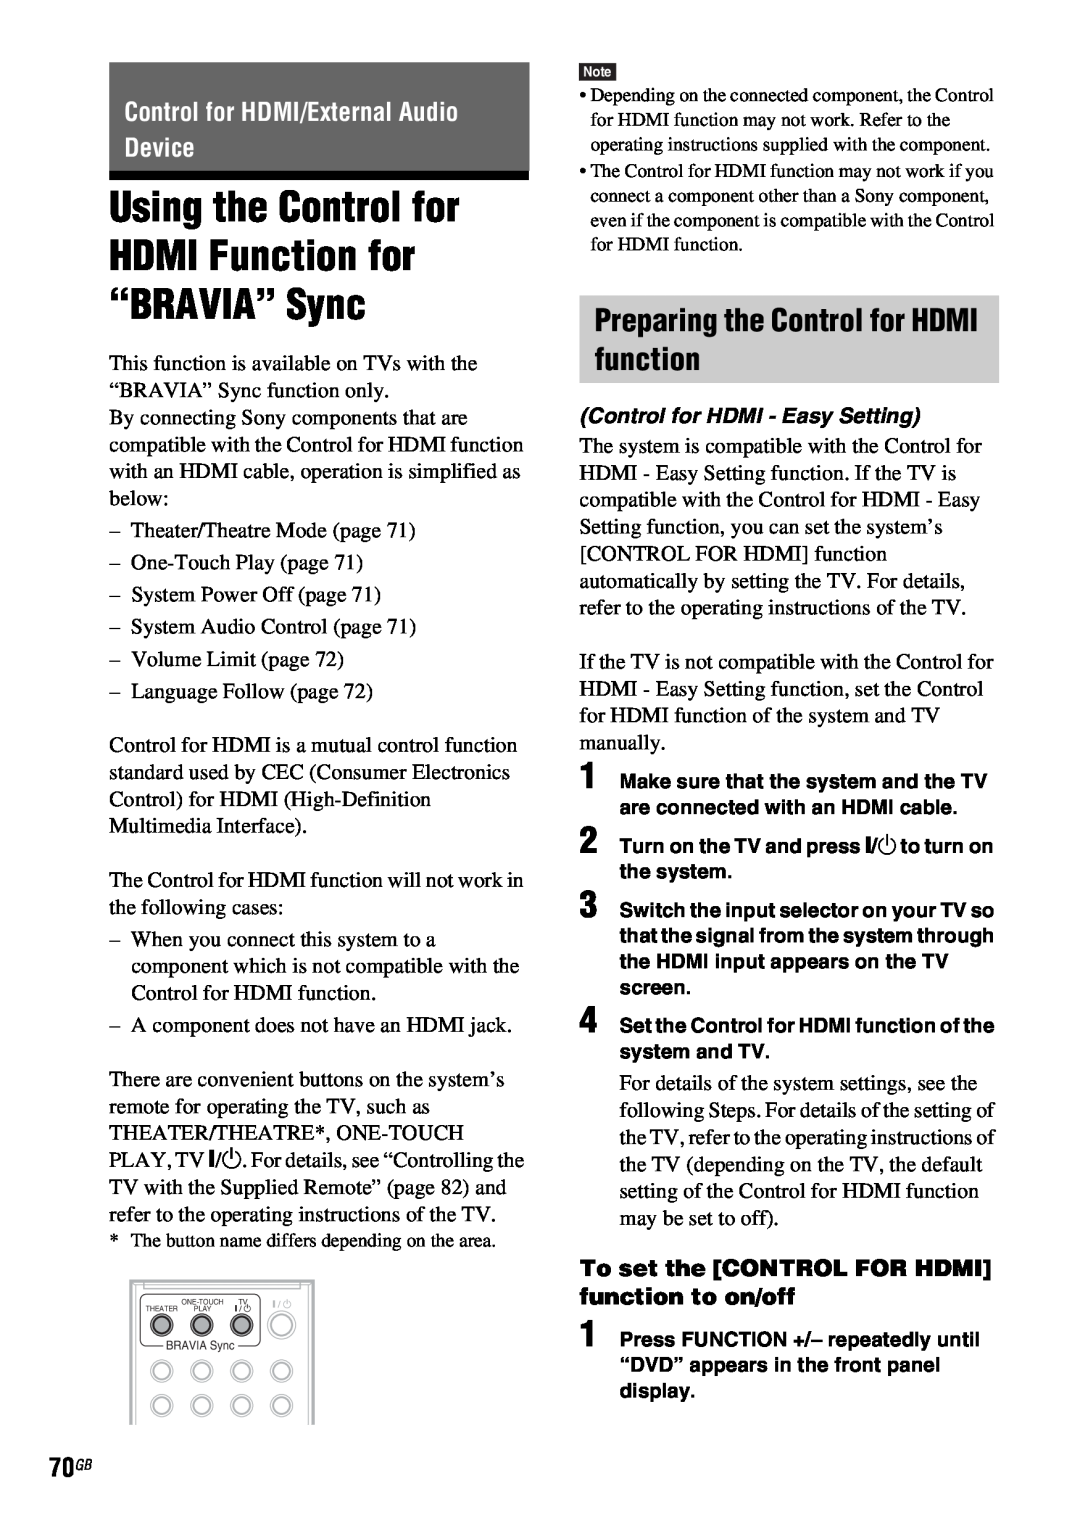 Sony DAV-HDX685 manual Preparing the Control for HDMI function, Control for HDMI/External Audio Device 